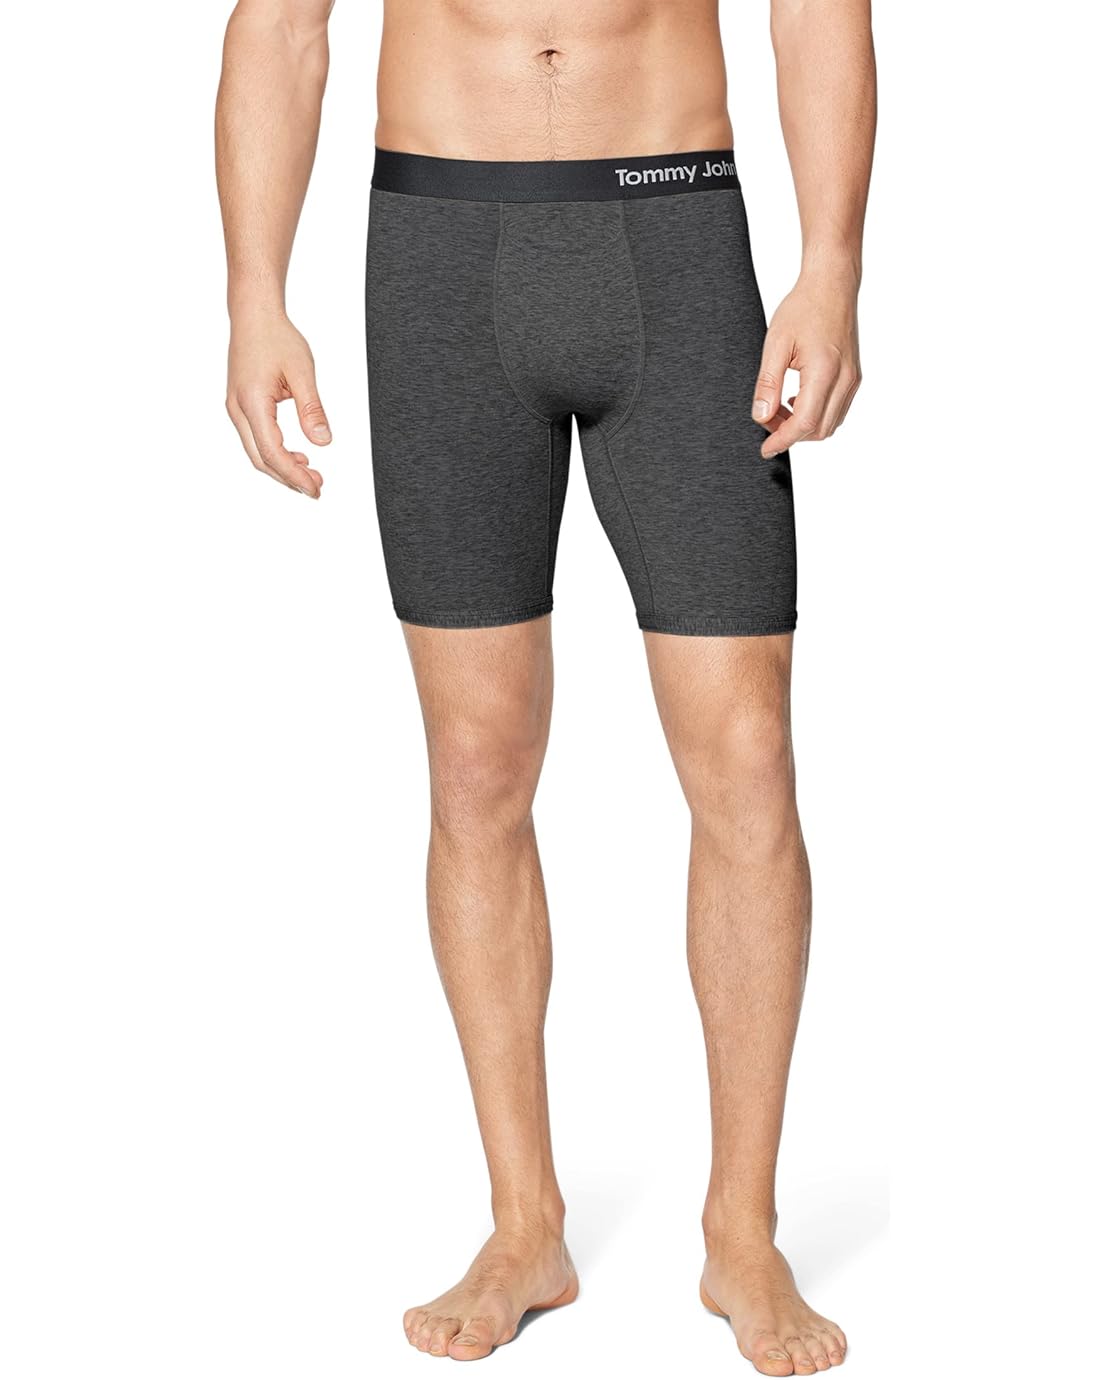  Tommy John Cool Cotton Boxer Brief 8